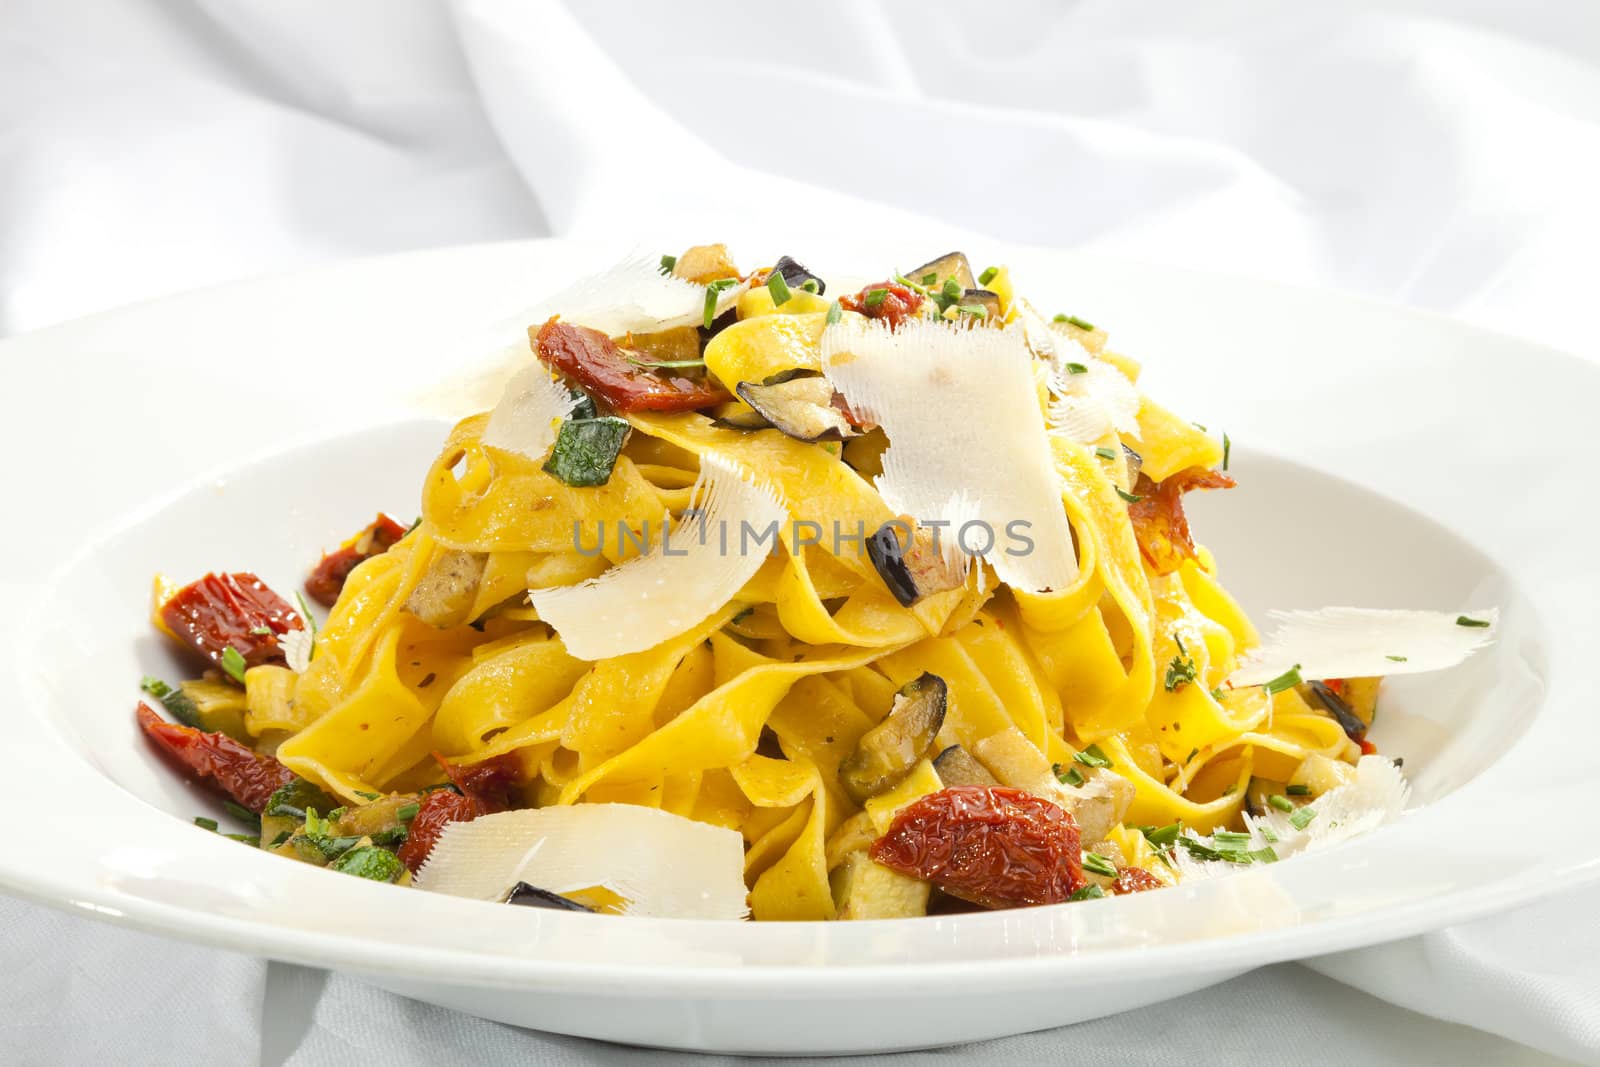 Fettuccine with dried tomatoes, parmesan and eggplant